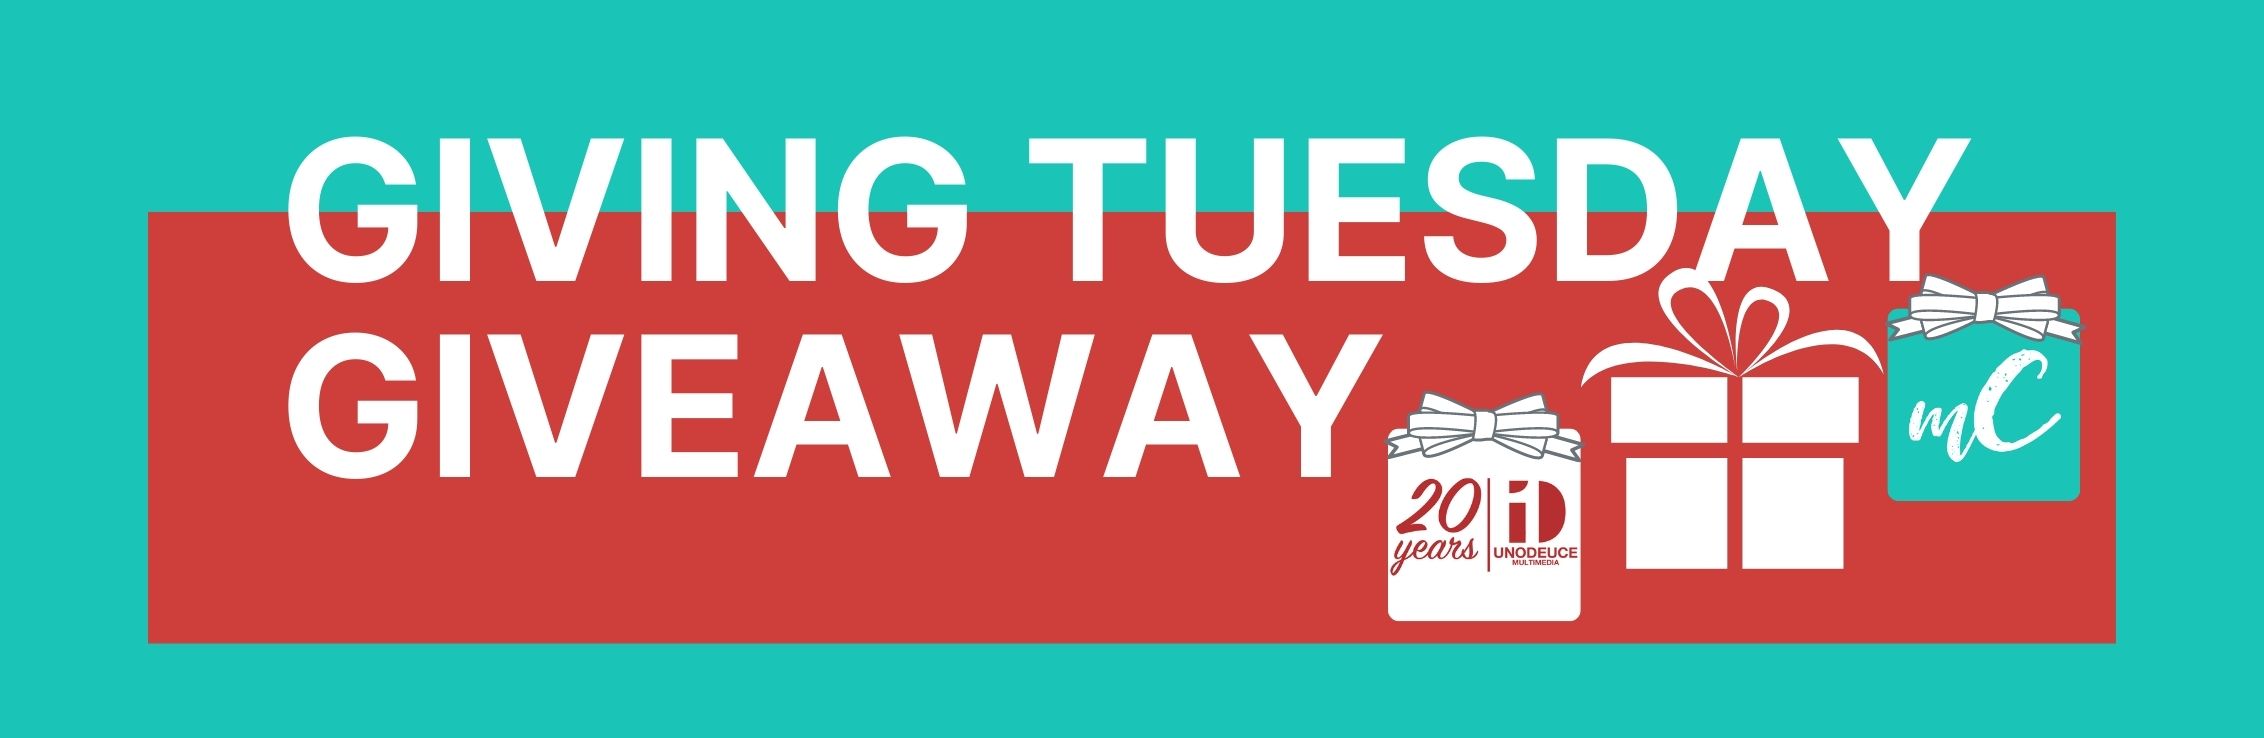 giving tuesday video giveaway